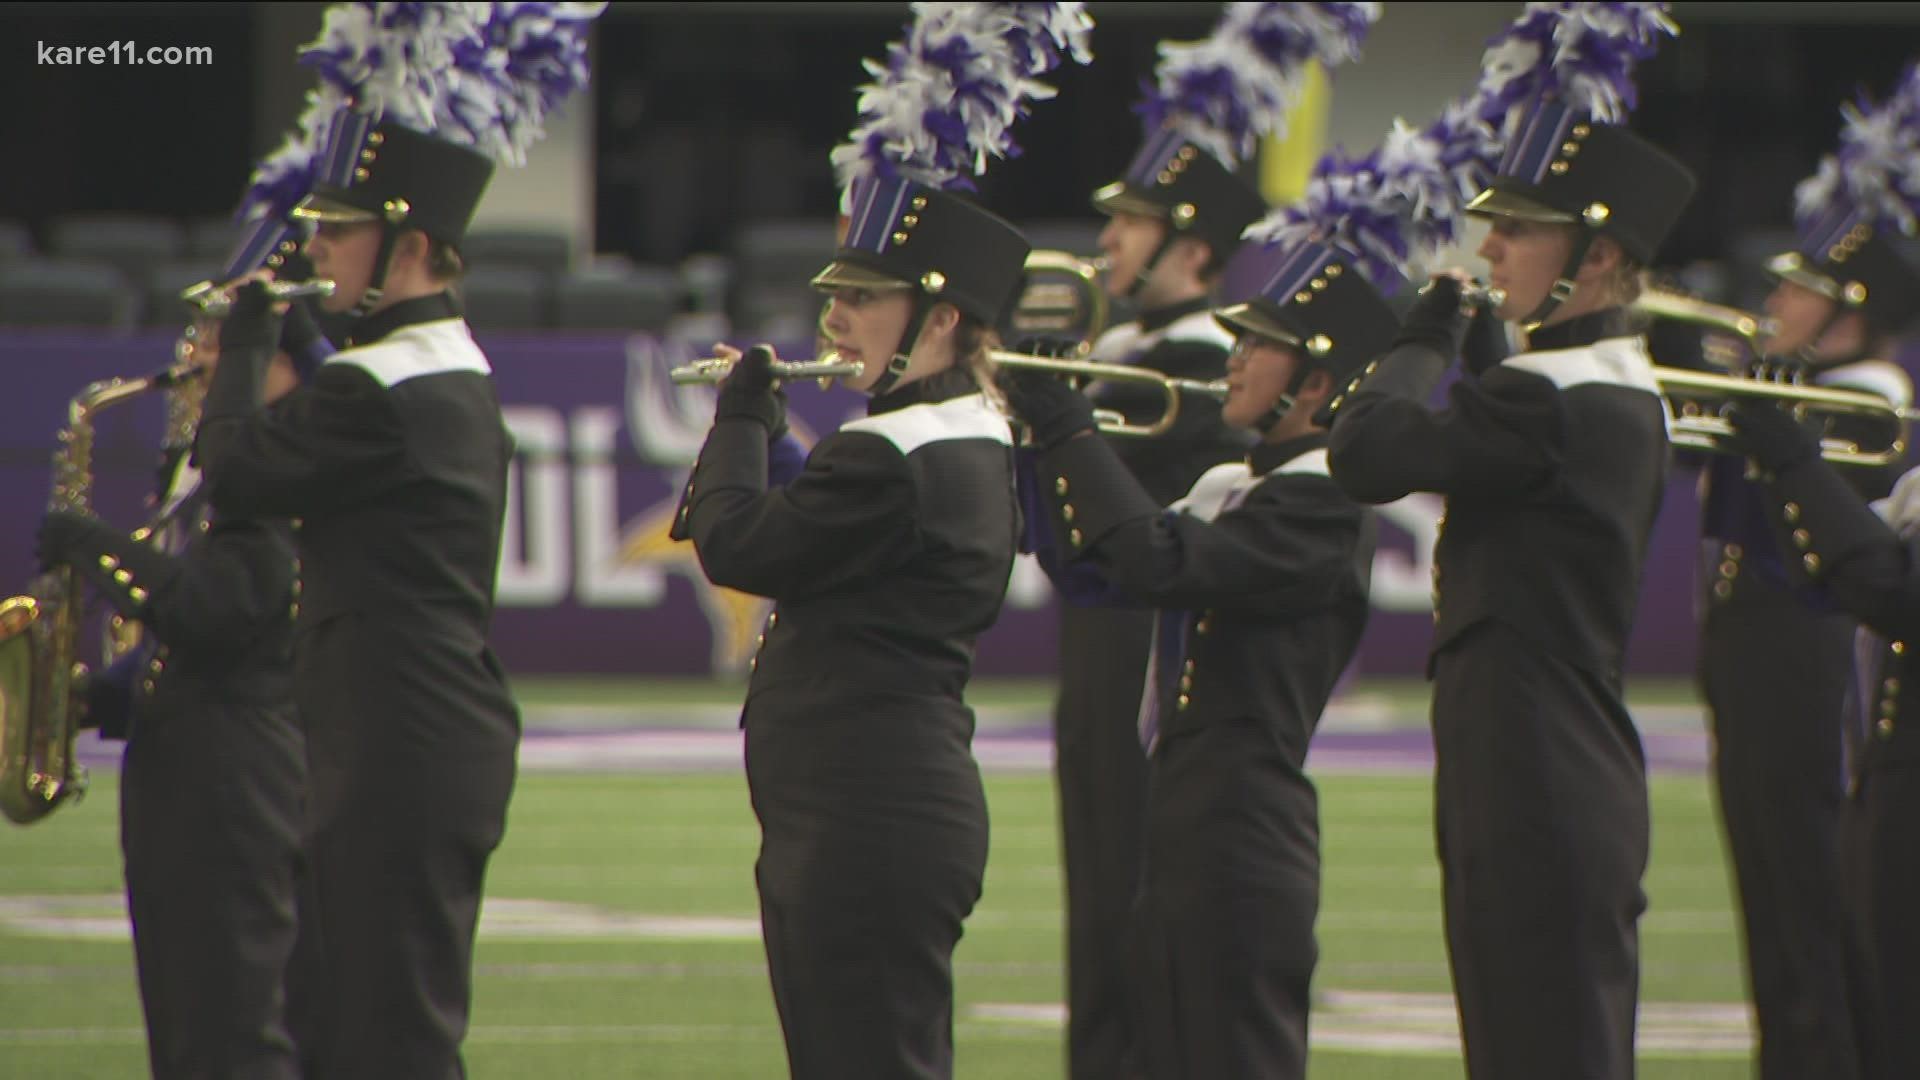 Nearly 5,000 high school and college students performed at the 2021 Youth In Music Championships at U.S. Bank Stadium Saturday.